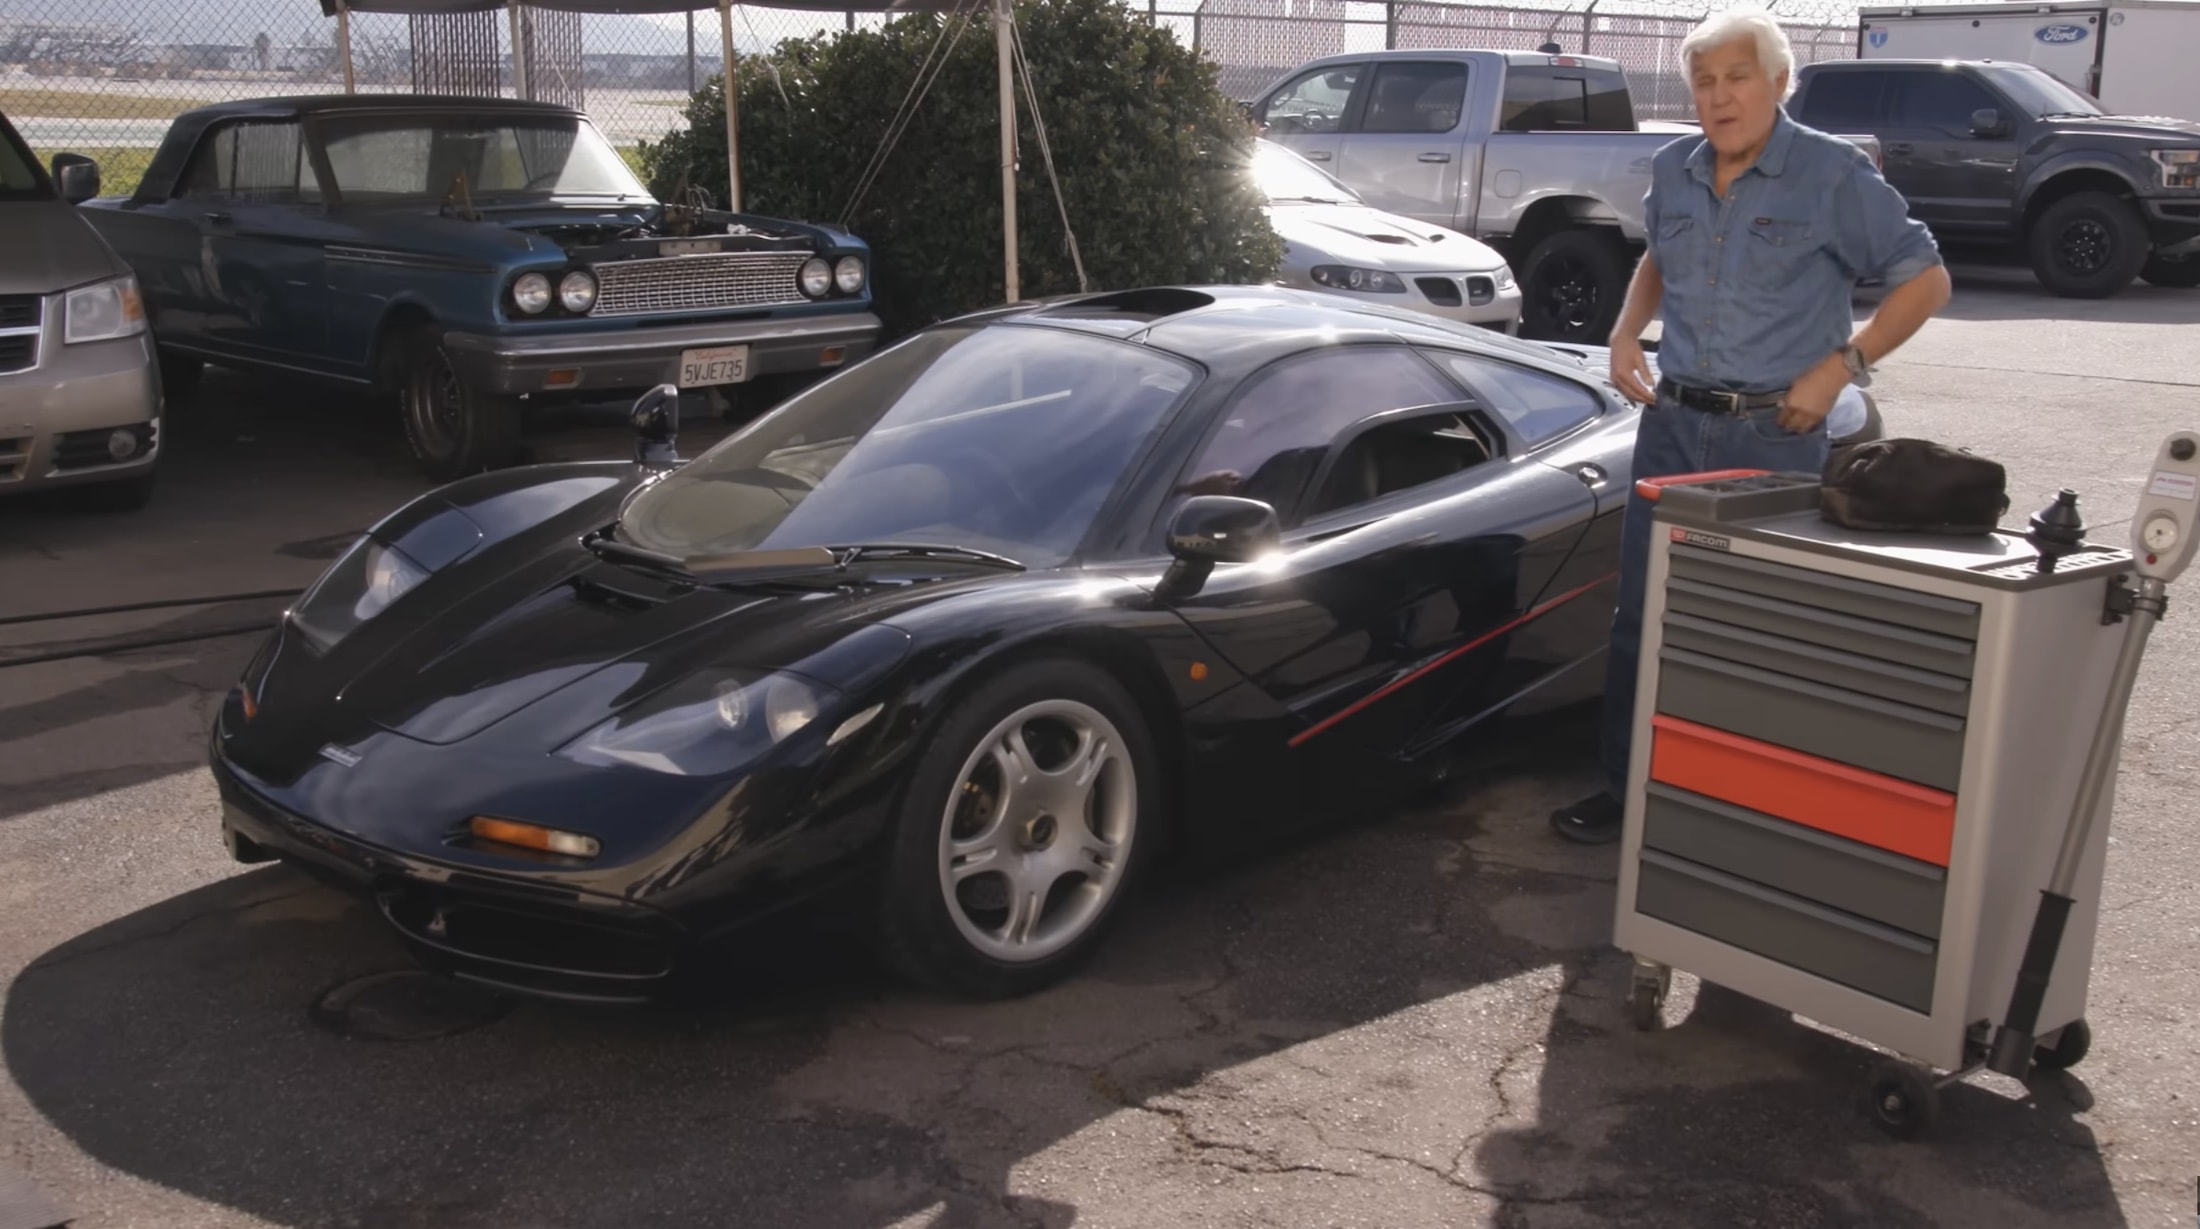 Jay Leno's McLaren F1 Iconic Supercar Gets a Refresh